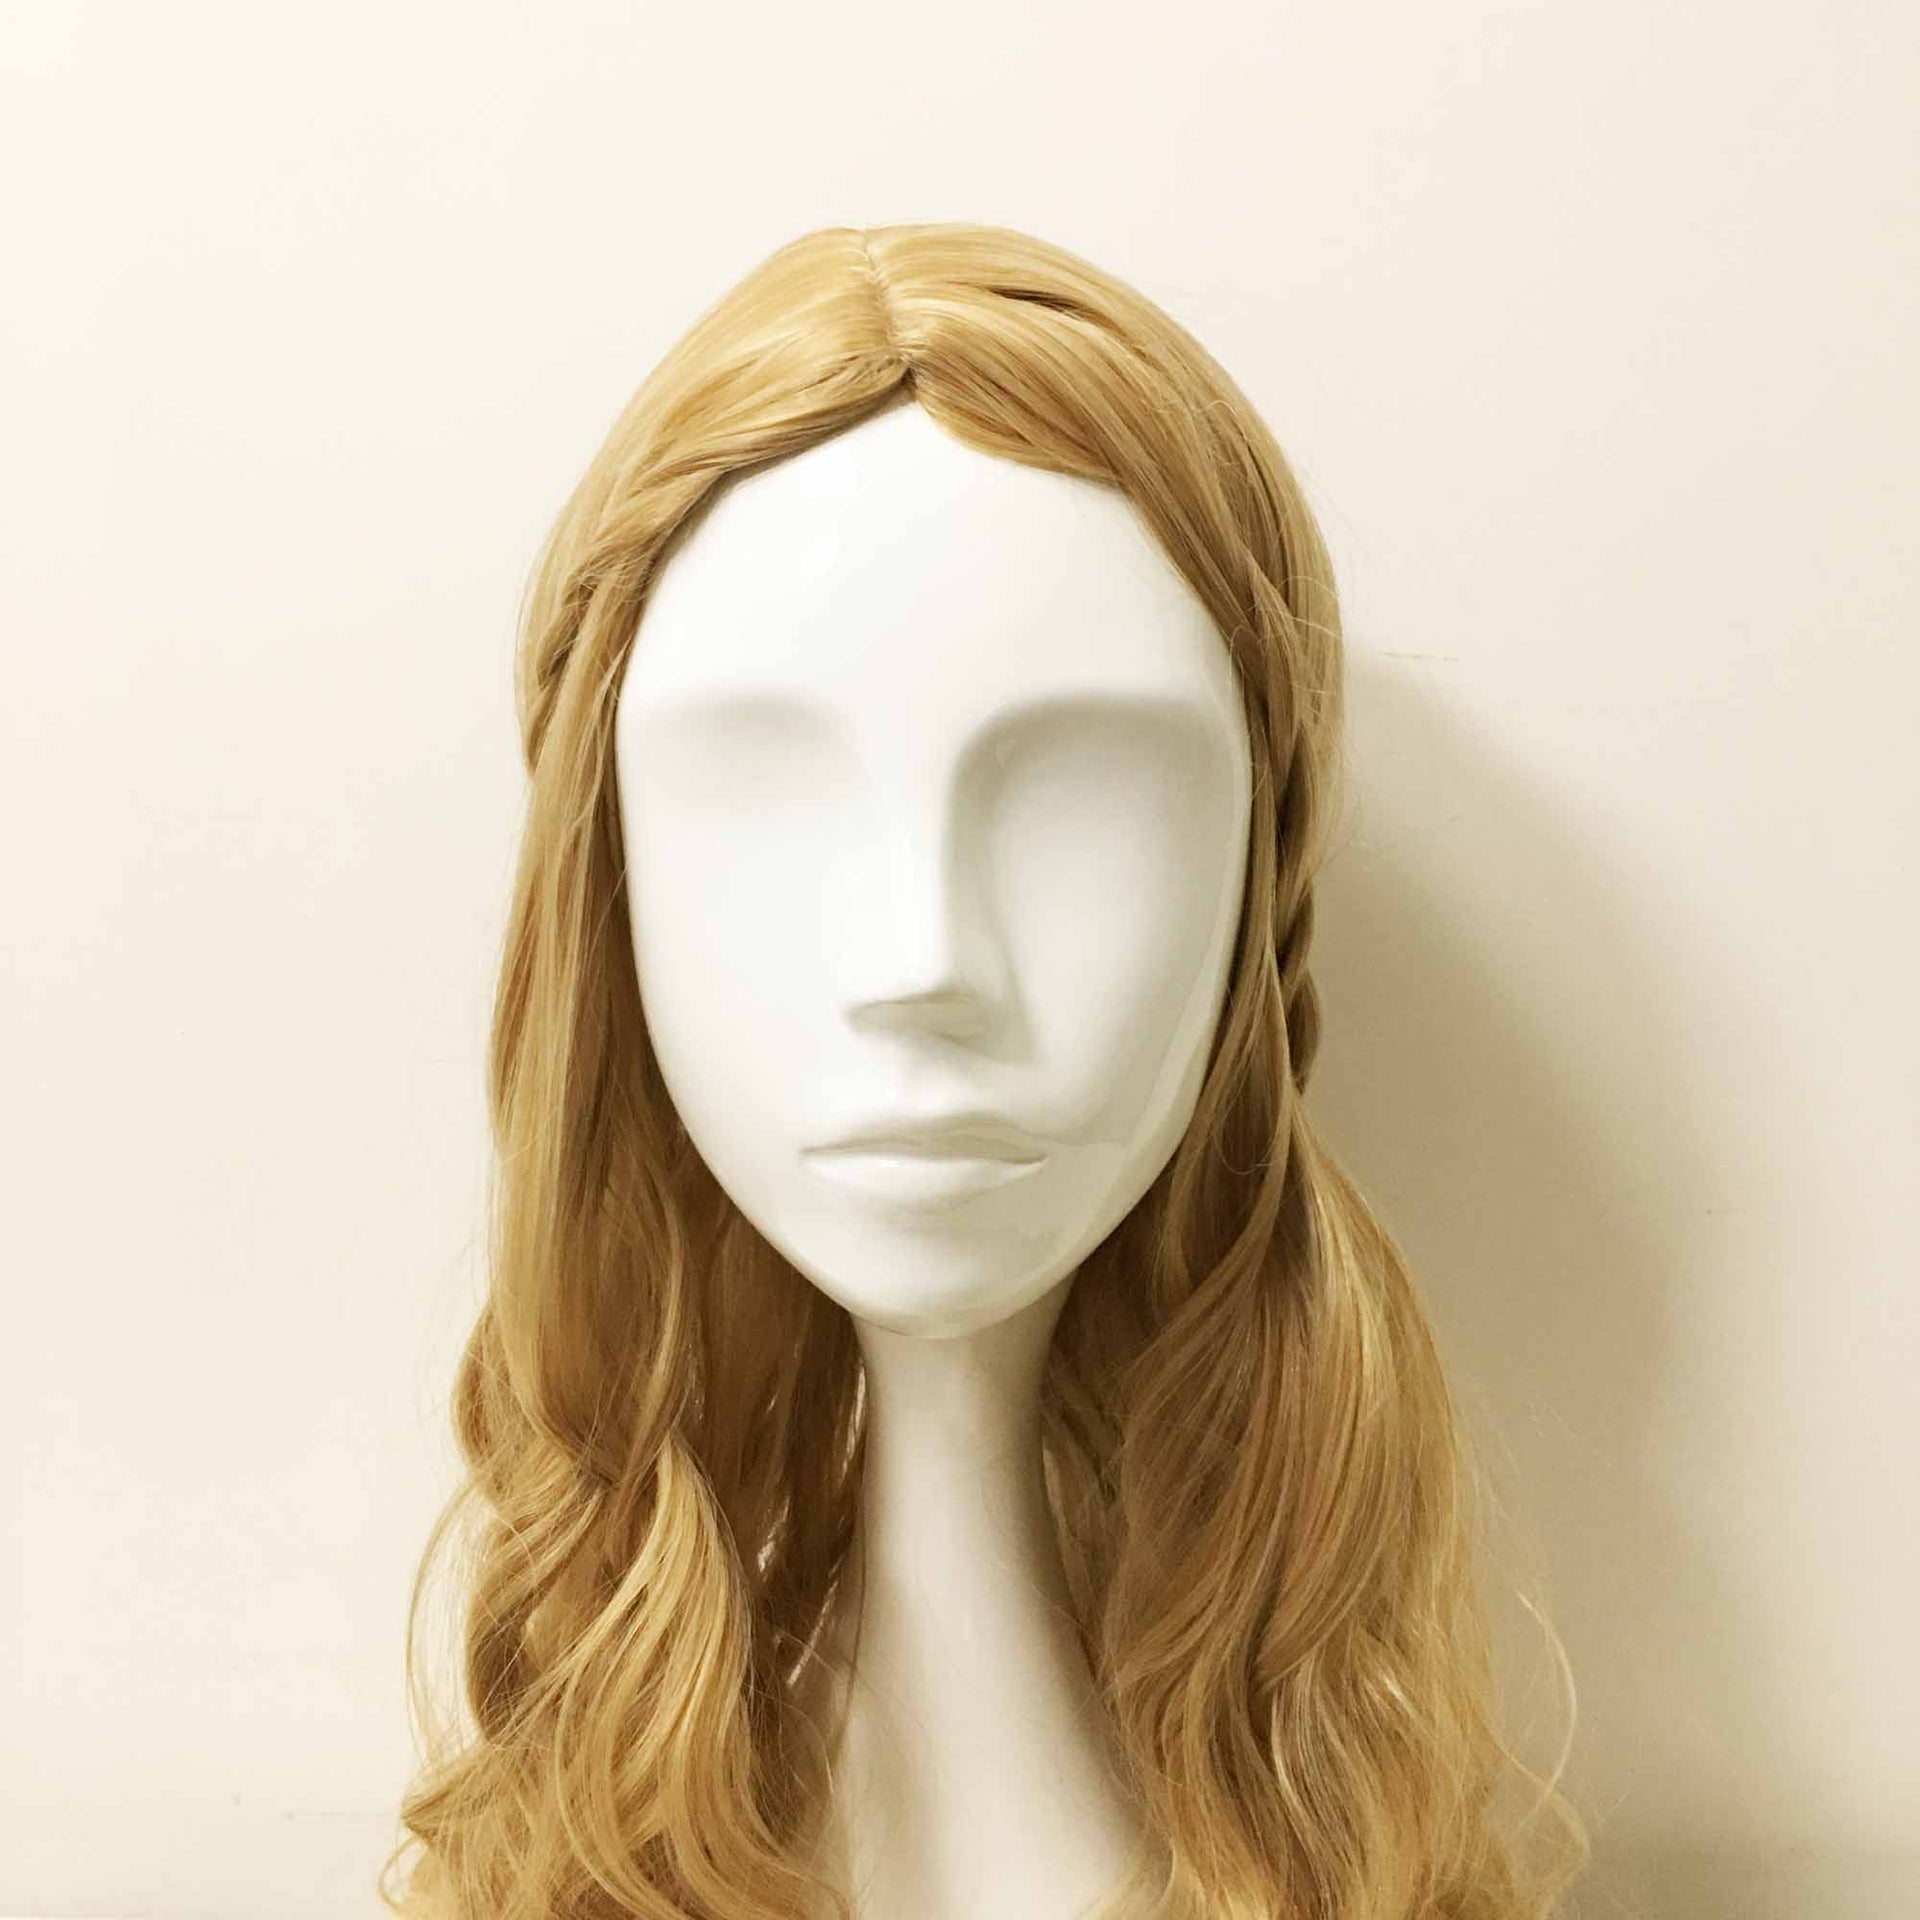 nevermindyrhead Women Blonde Long Curly Princess Style Braided Middle Part Wig